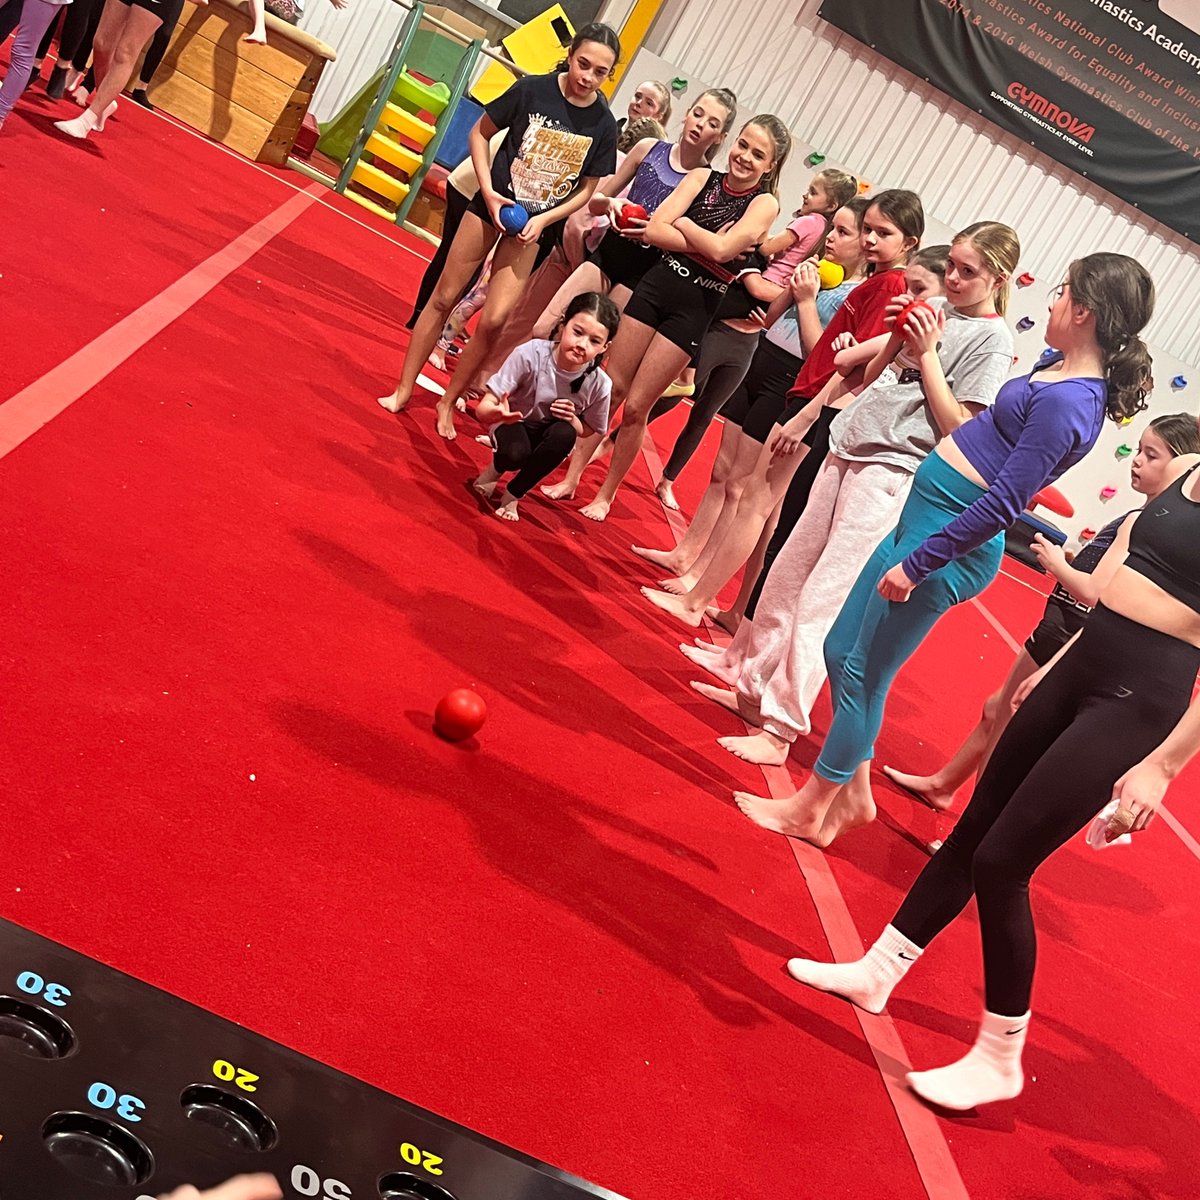 We had an amazing turn out for @BowlsBuddies at #ValleysGirls in Crumlin today - 34 girls giving bowls a go! @BowlsWales @StreetGameWales